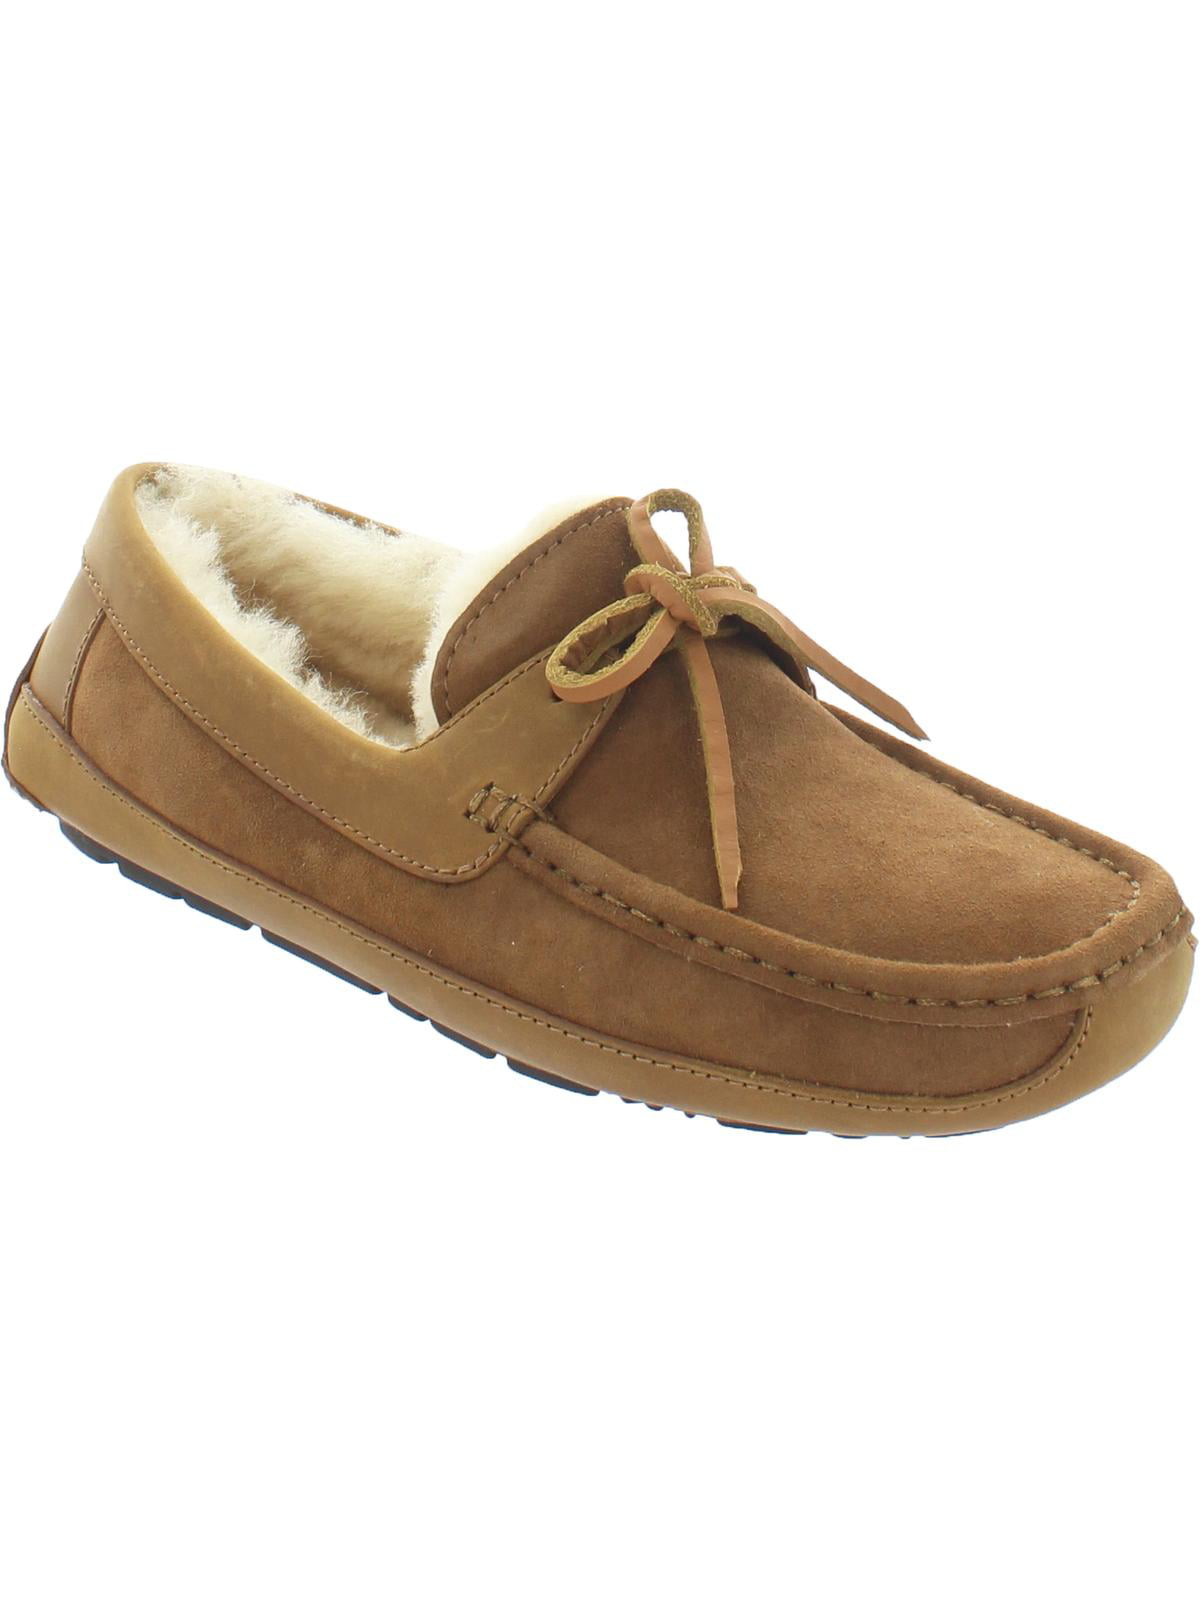 uggs byron slippers for men